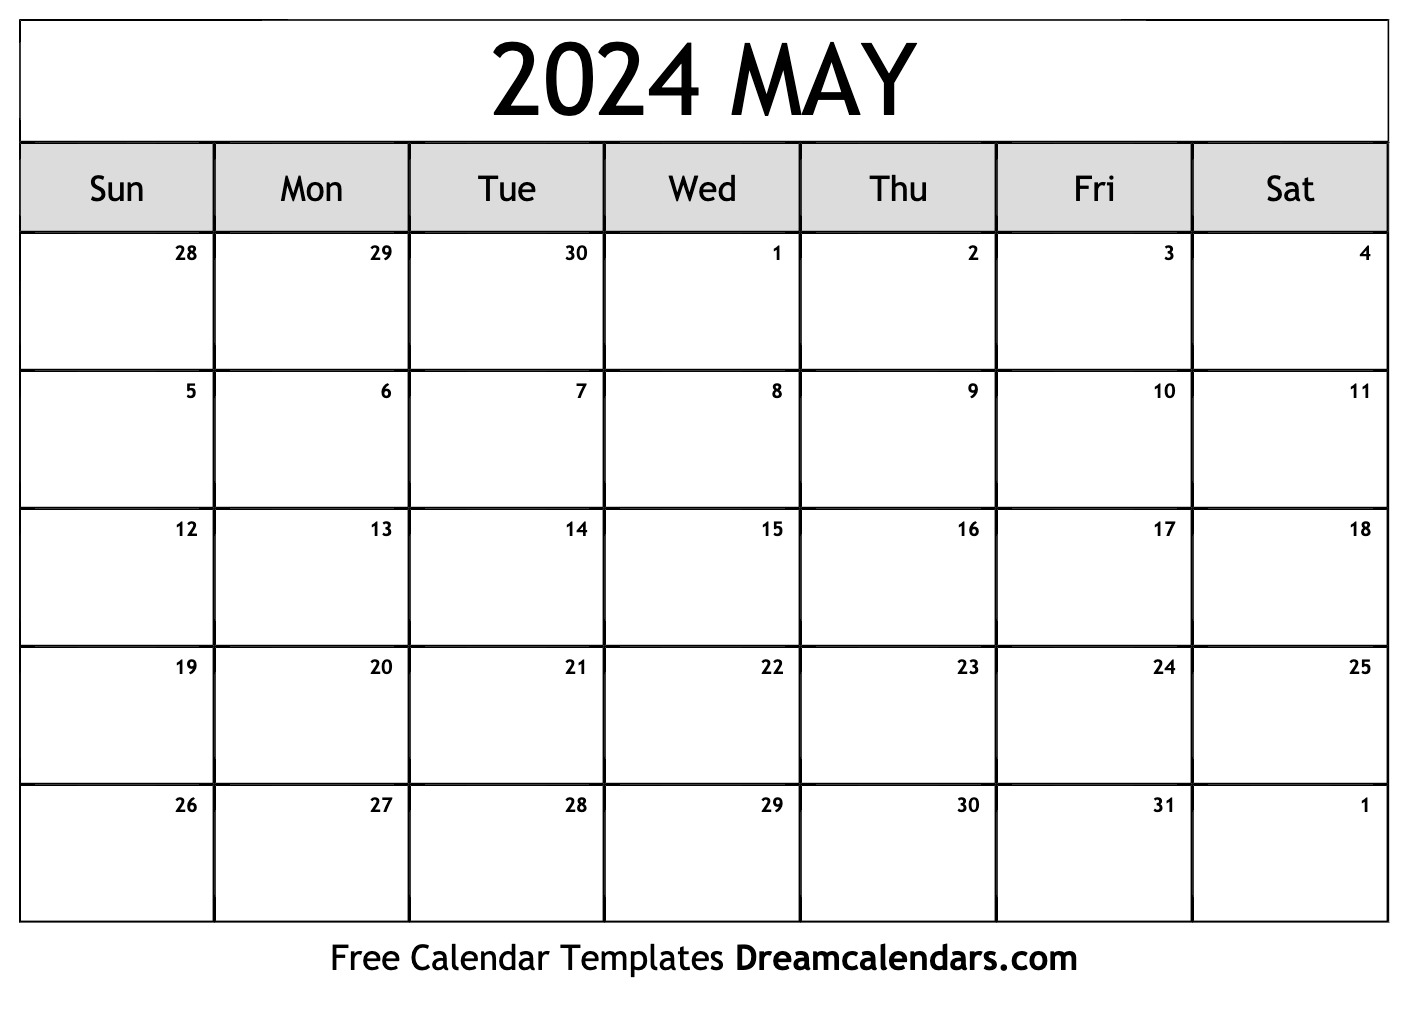 Daily Calendar May 2024 Cool Awasome Review of Printable Calendar for